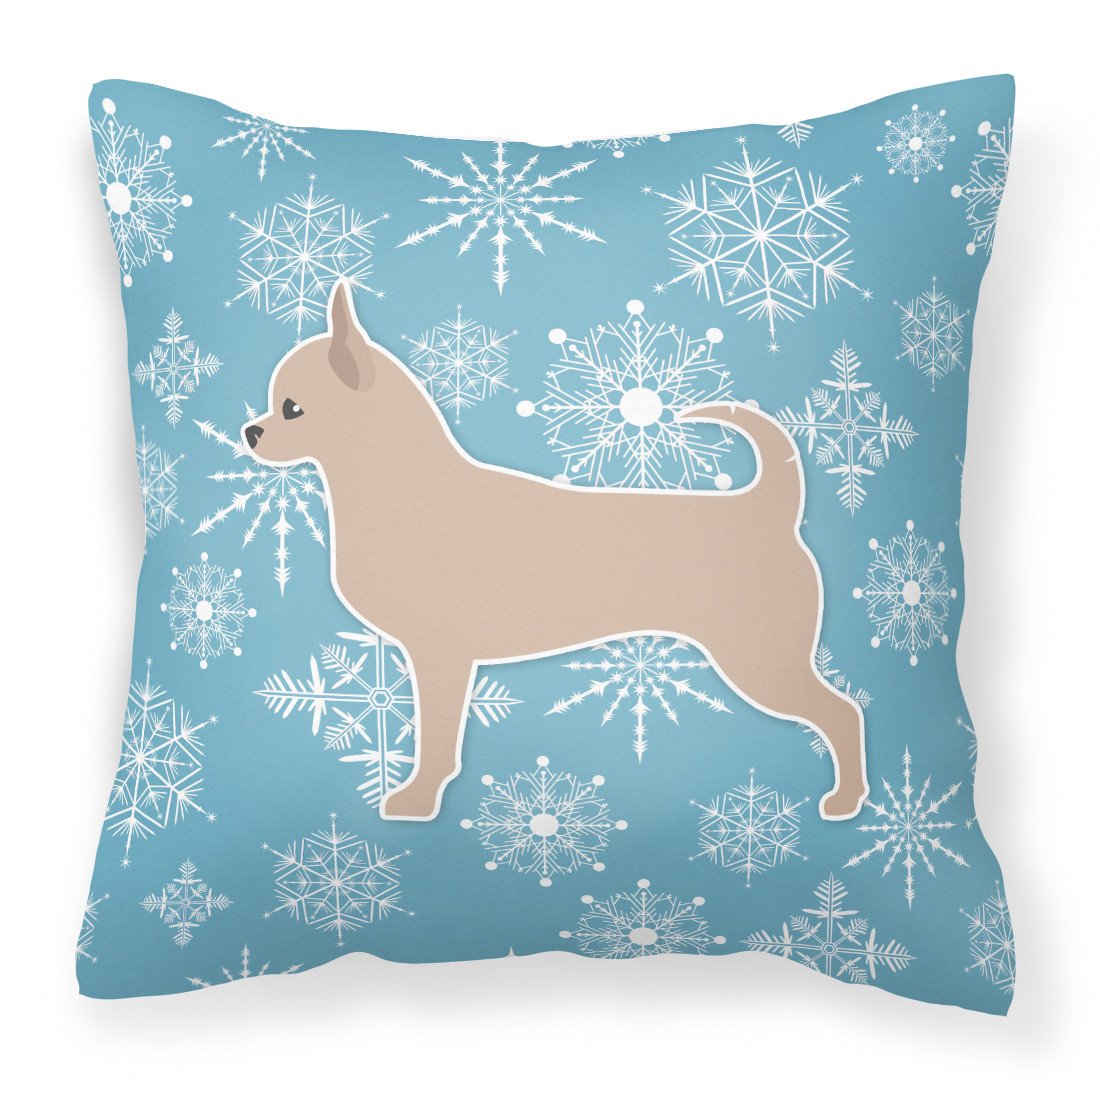 Winter Snowflake Chihuahua Fabric Decorative Pillow BB3550PW1818 by Caroline's Treasures